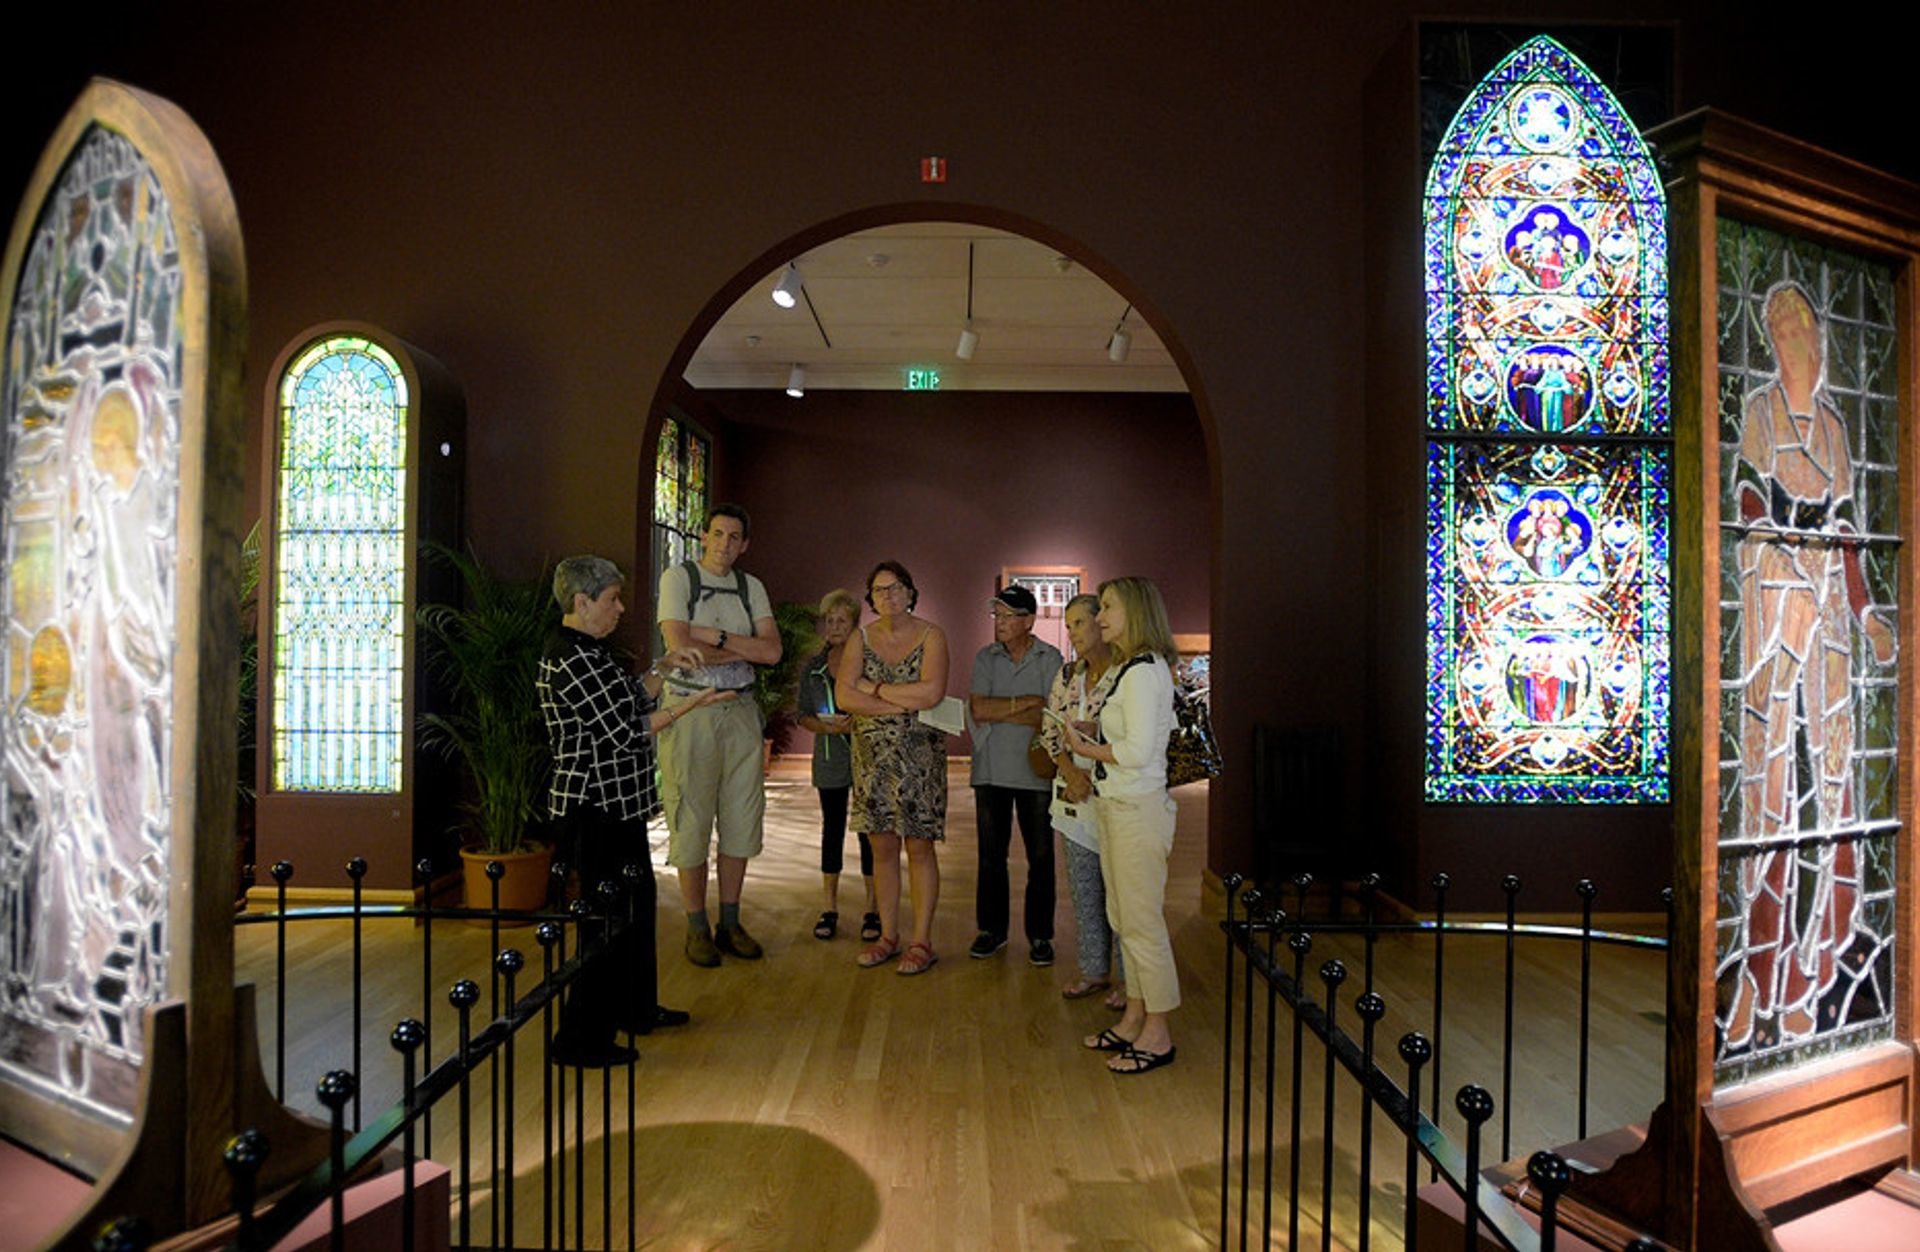 people walking into an exhibit with stained glass windows and black metal fence